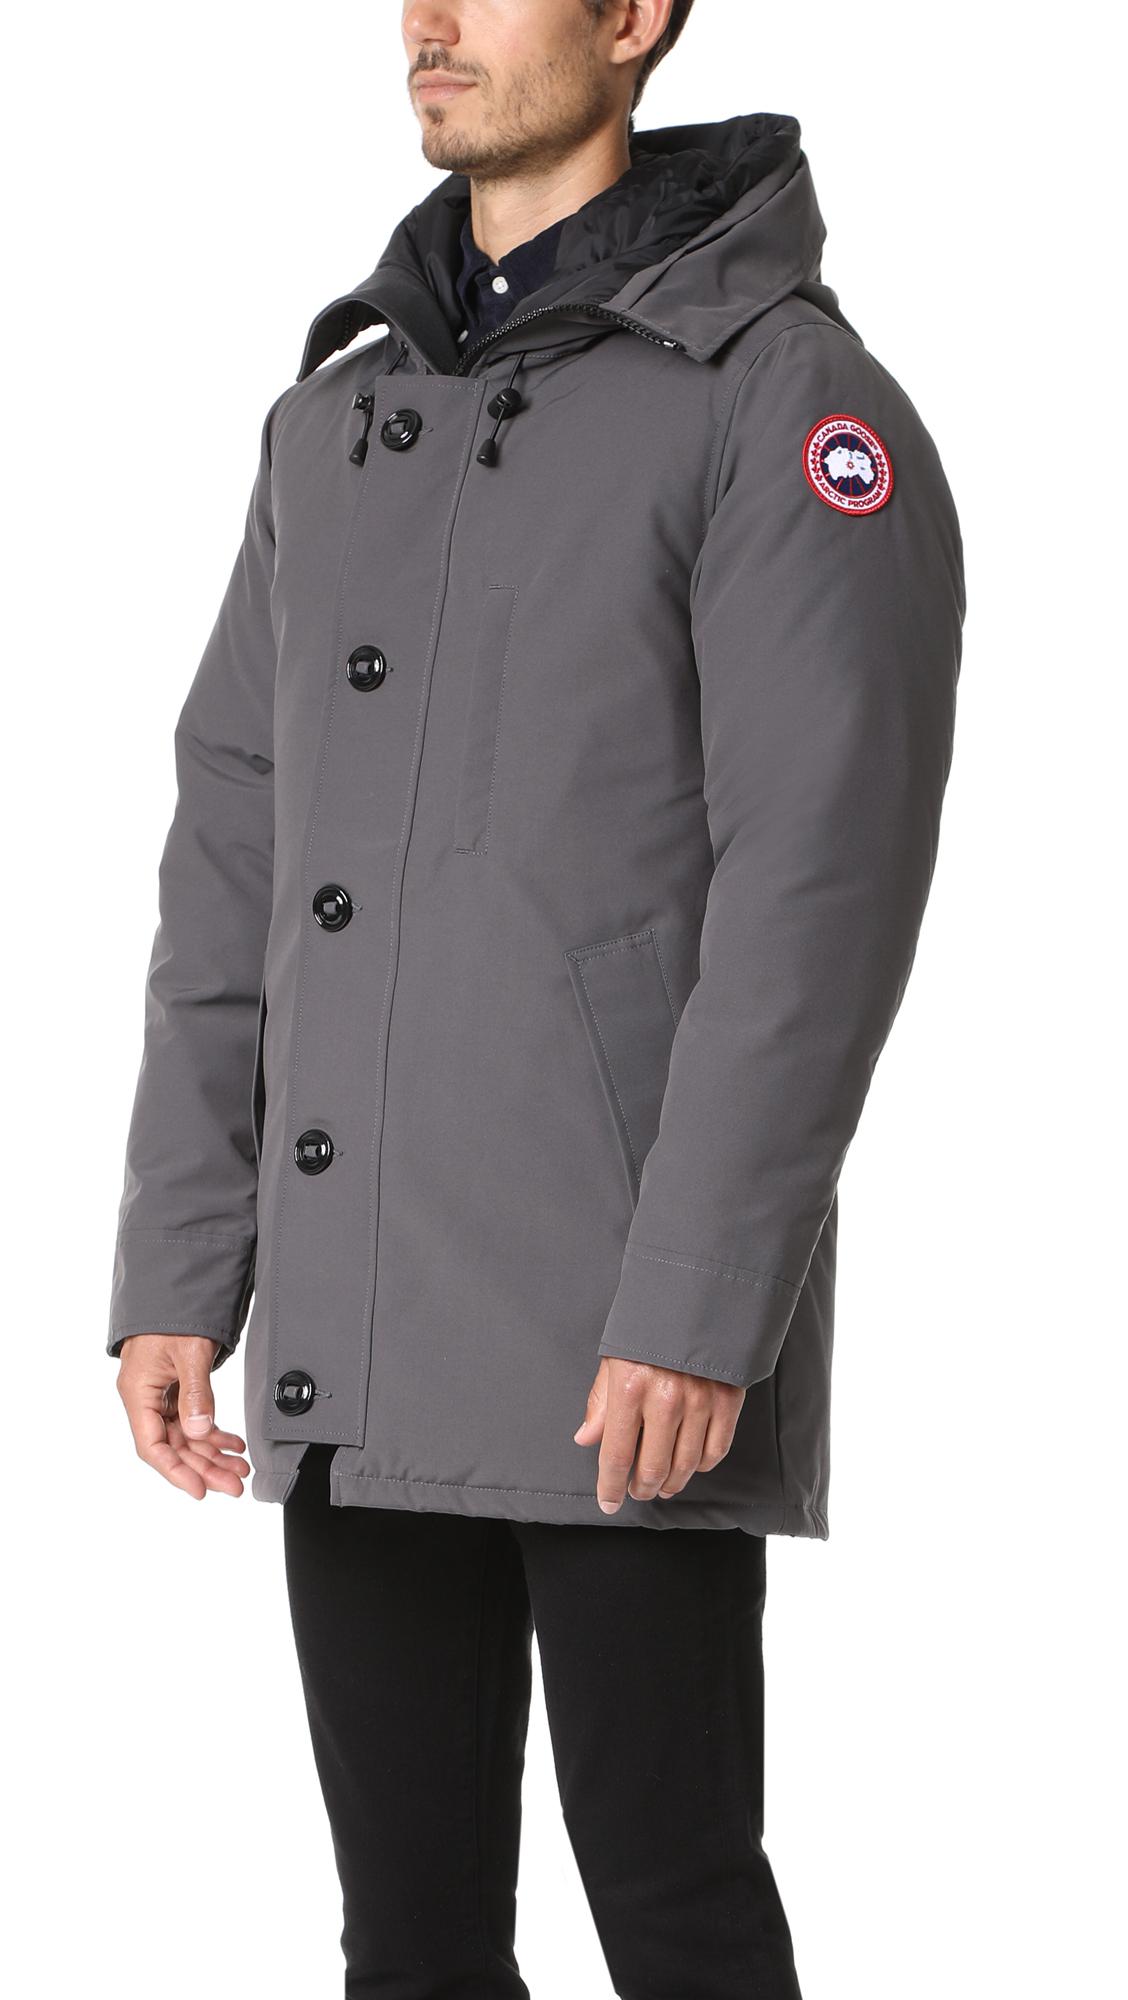 Canada Goose Chateau Parka With Fur in Graphite (Blue) for Men - Lyst